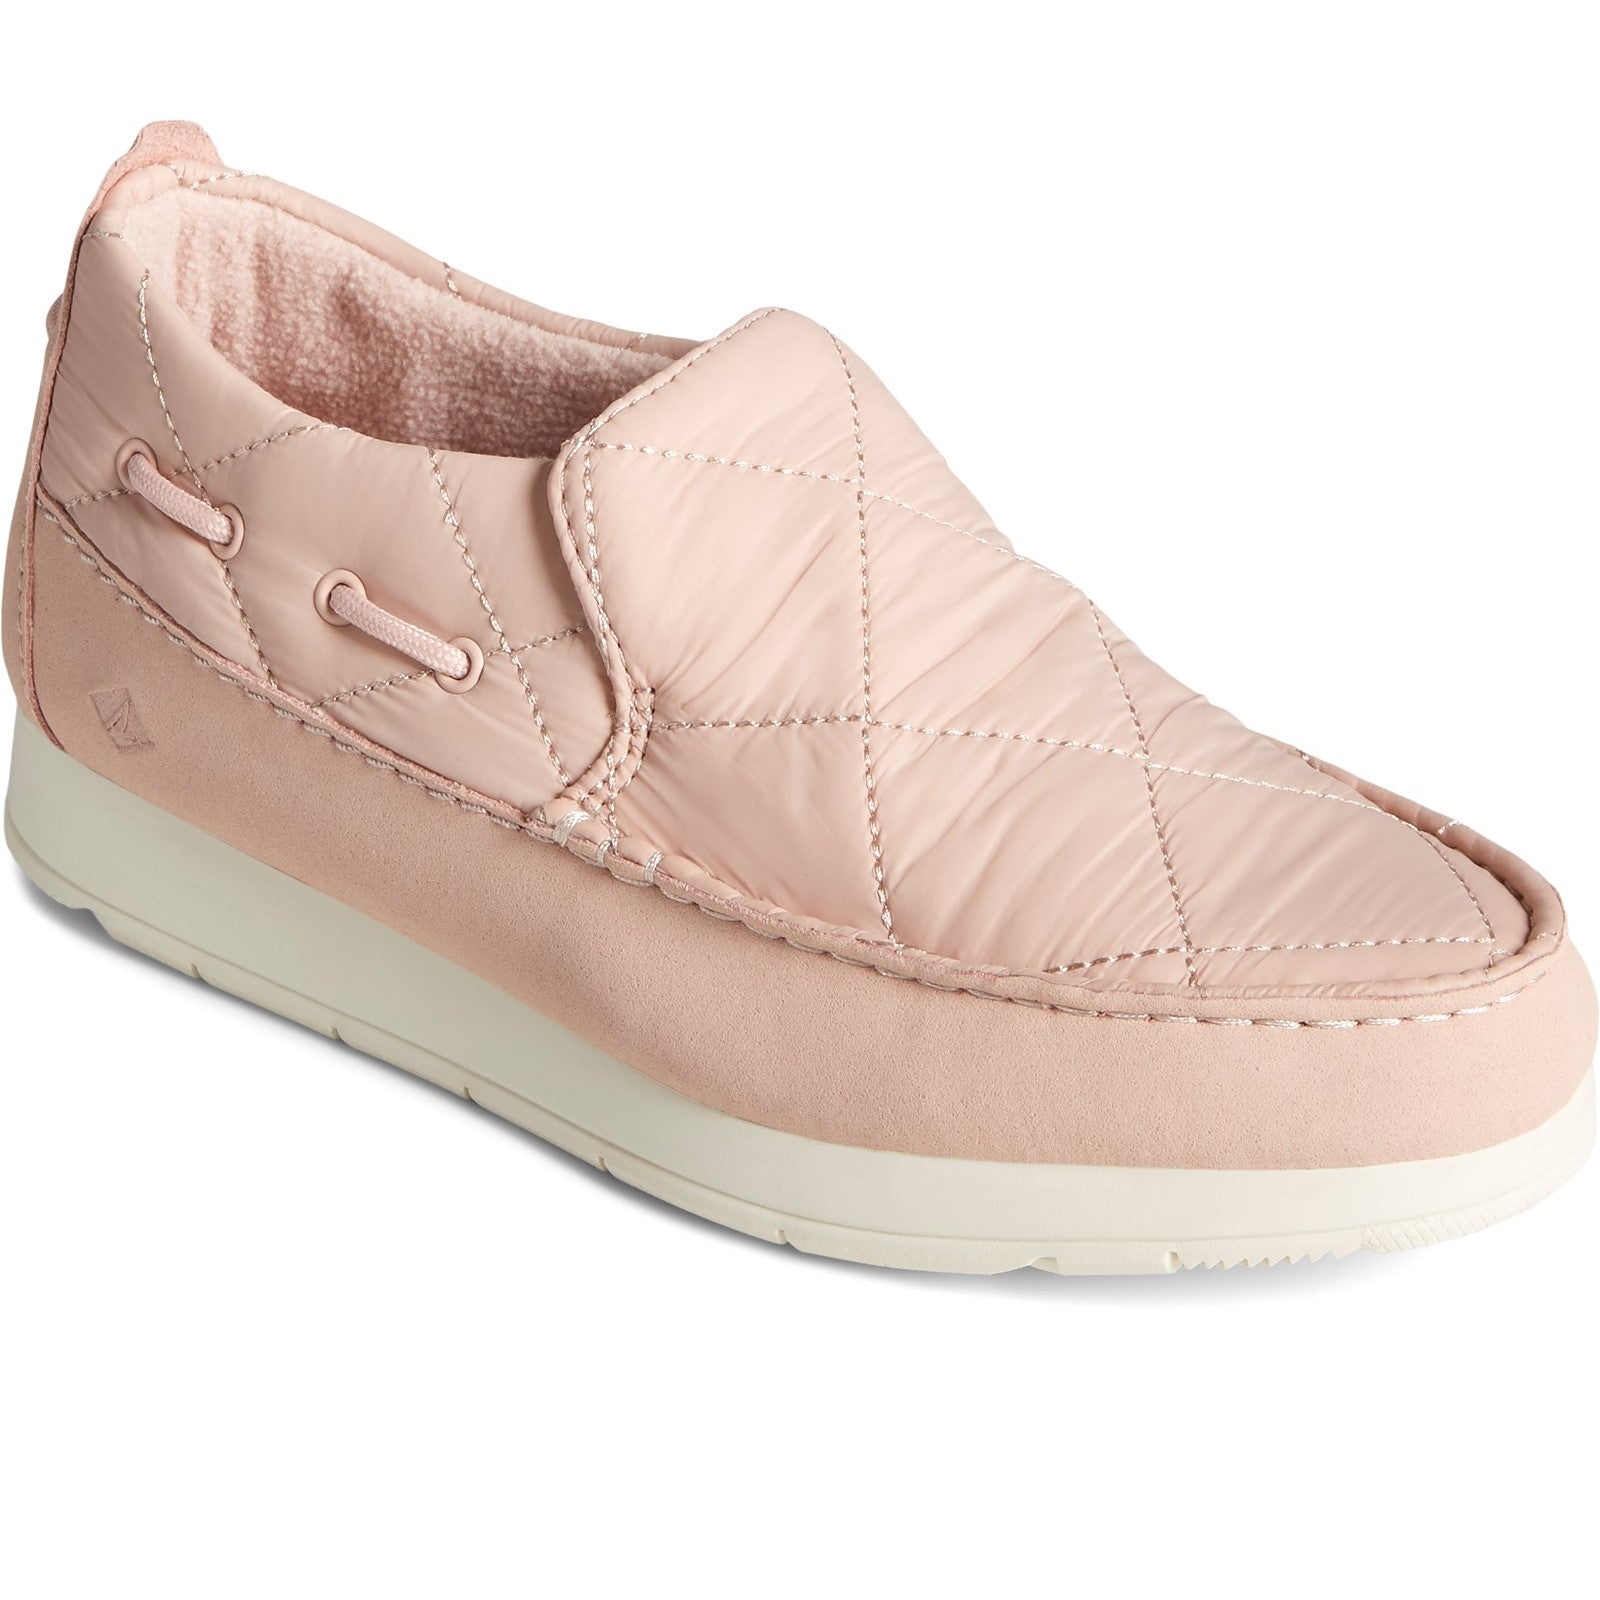 Sperry Womens Moc-Sider Nylon Slip On Trainers - Pink